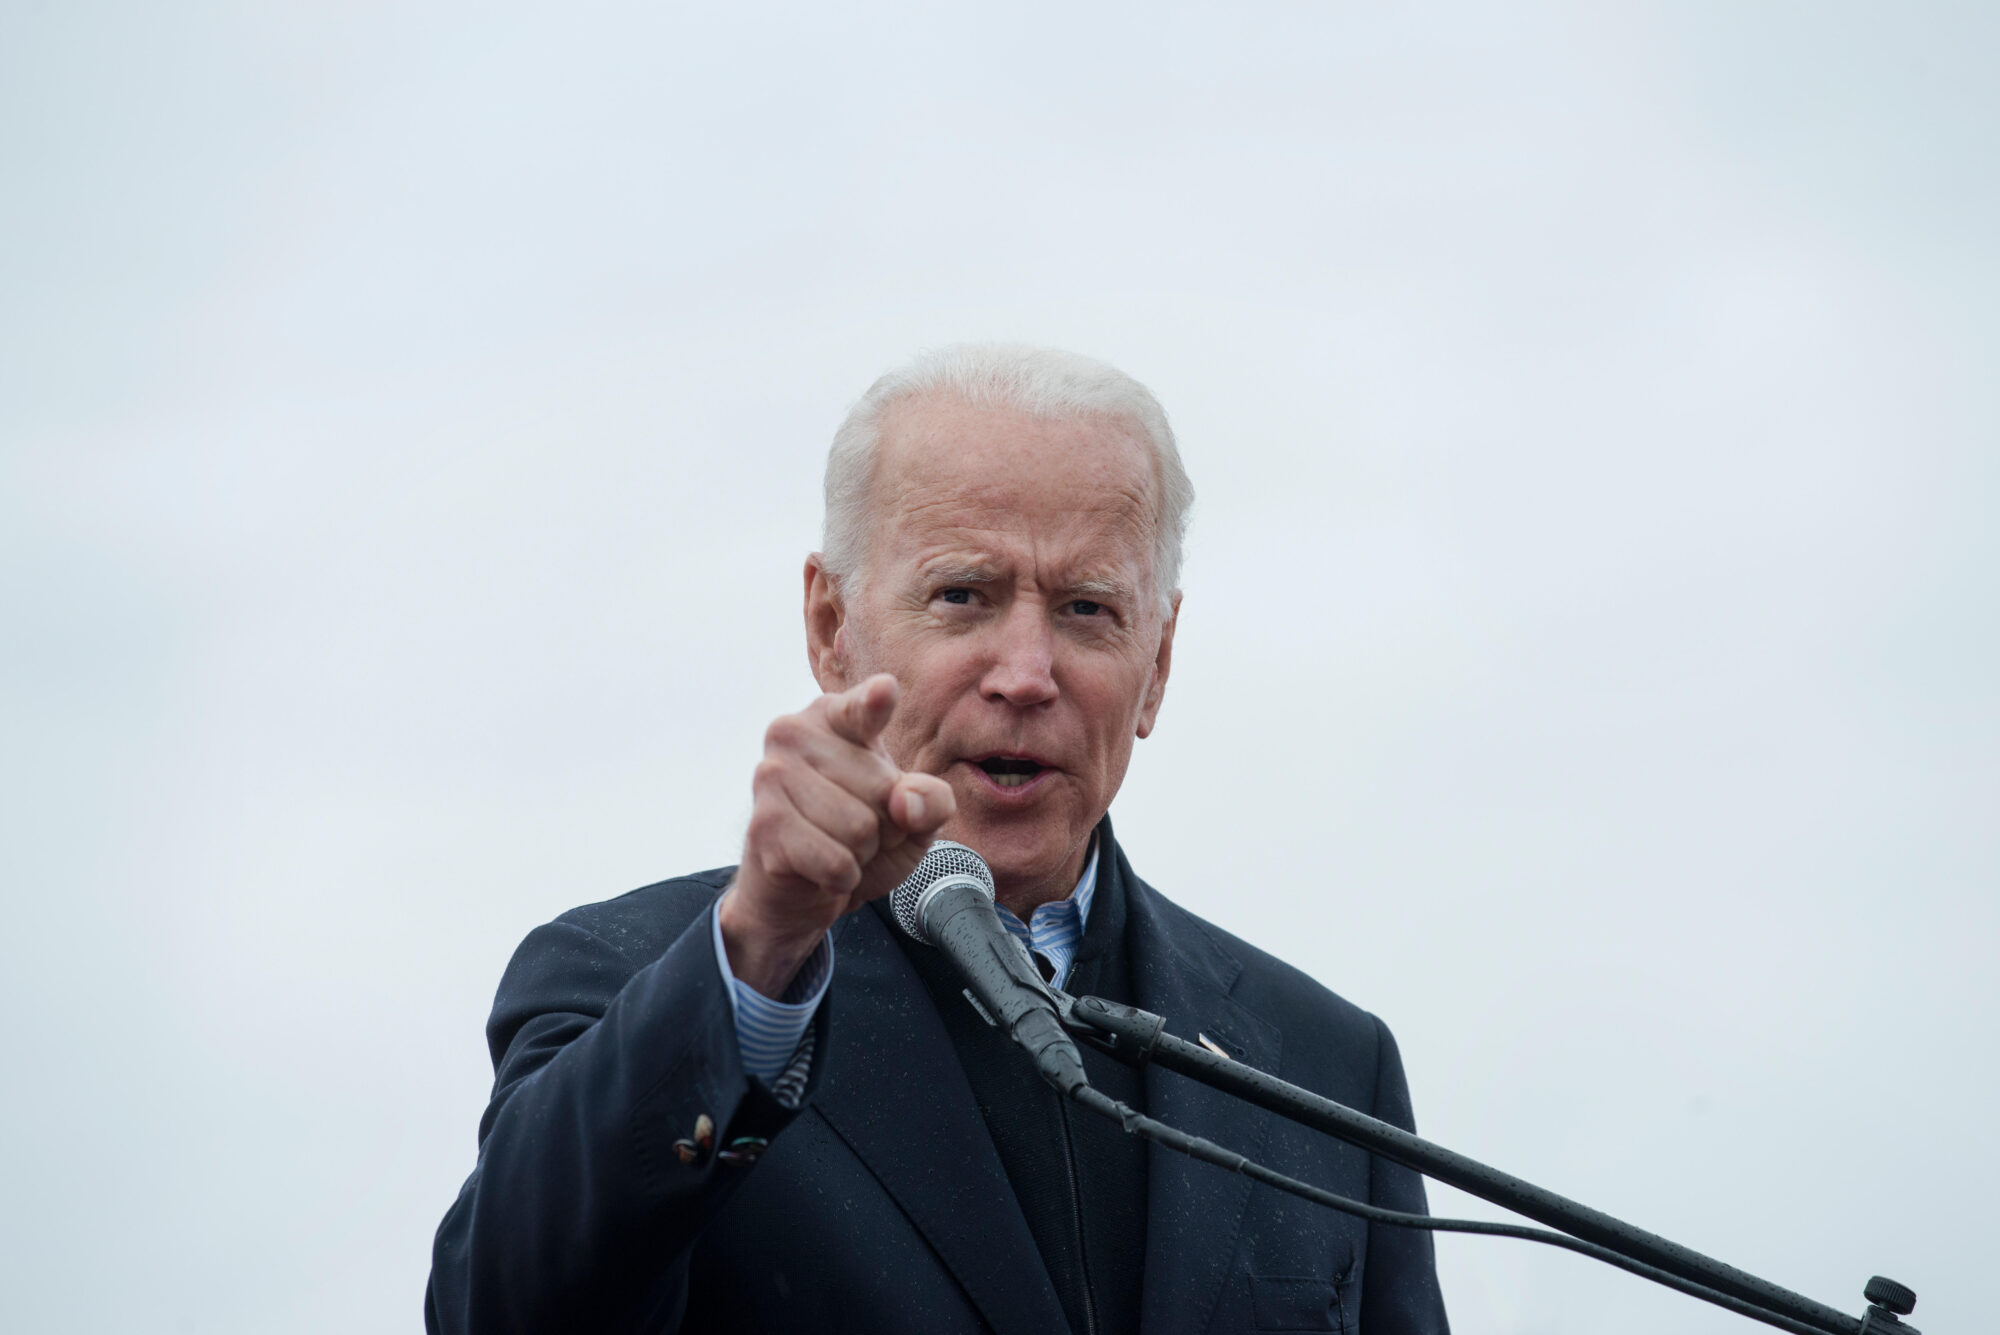 <p>Climate issues were central to Joe Biden&#8217;s platform during his presidential campaign. It remains to be seen how this change of priorities in the White House will impact the direction of South American soybean trade (Image: Alamy)</p>